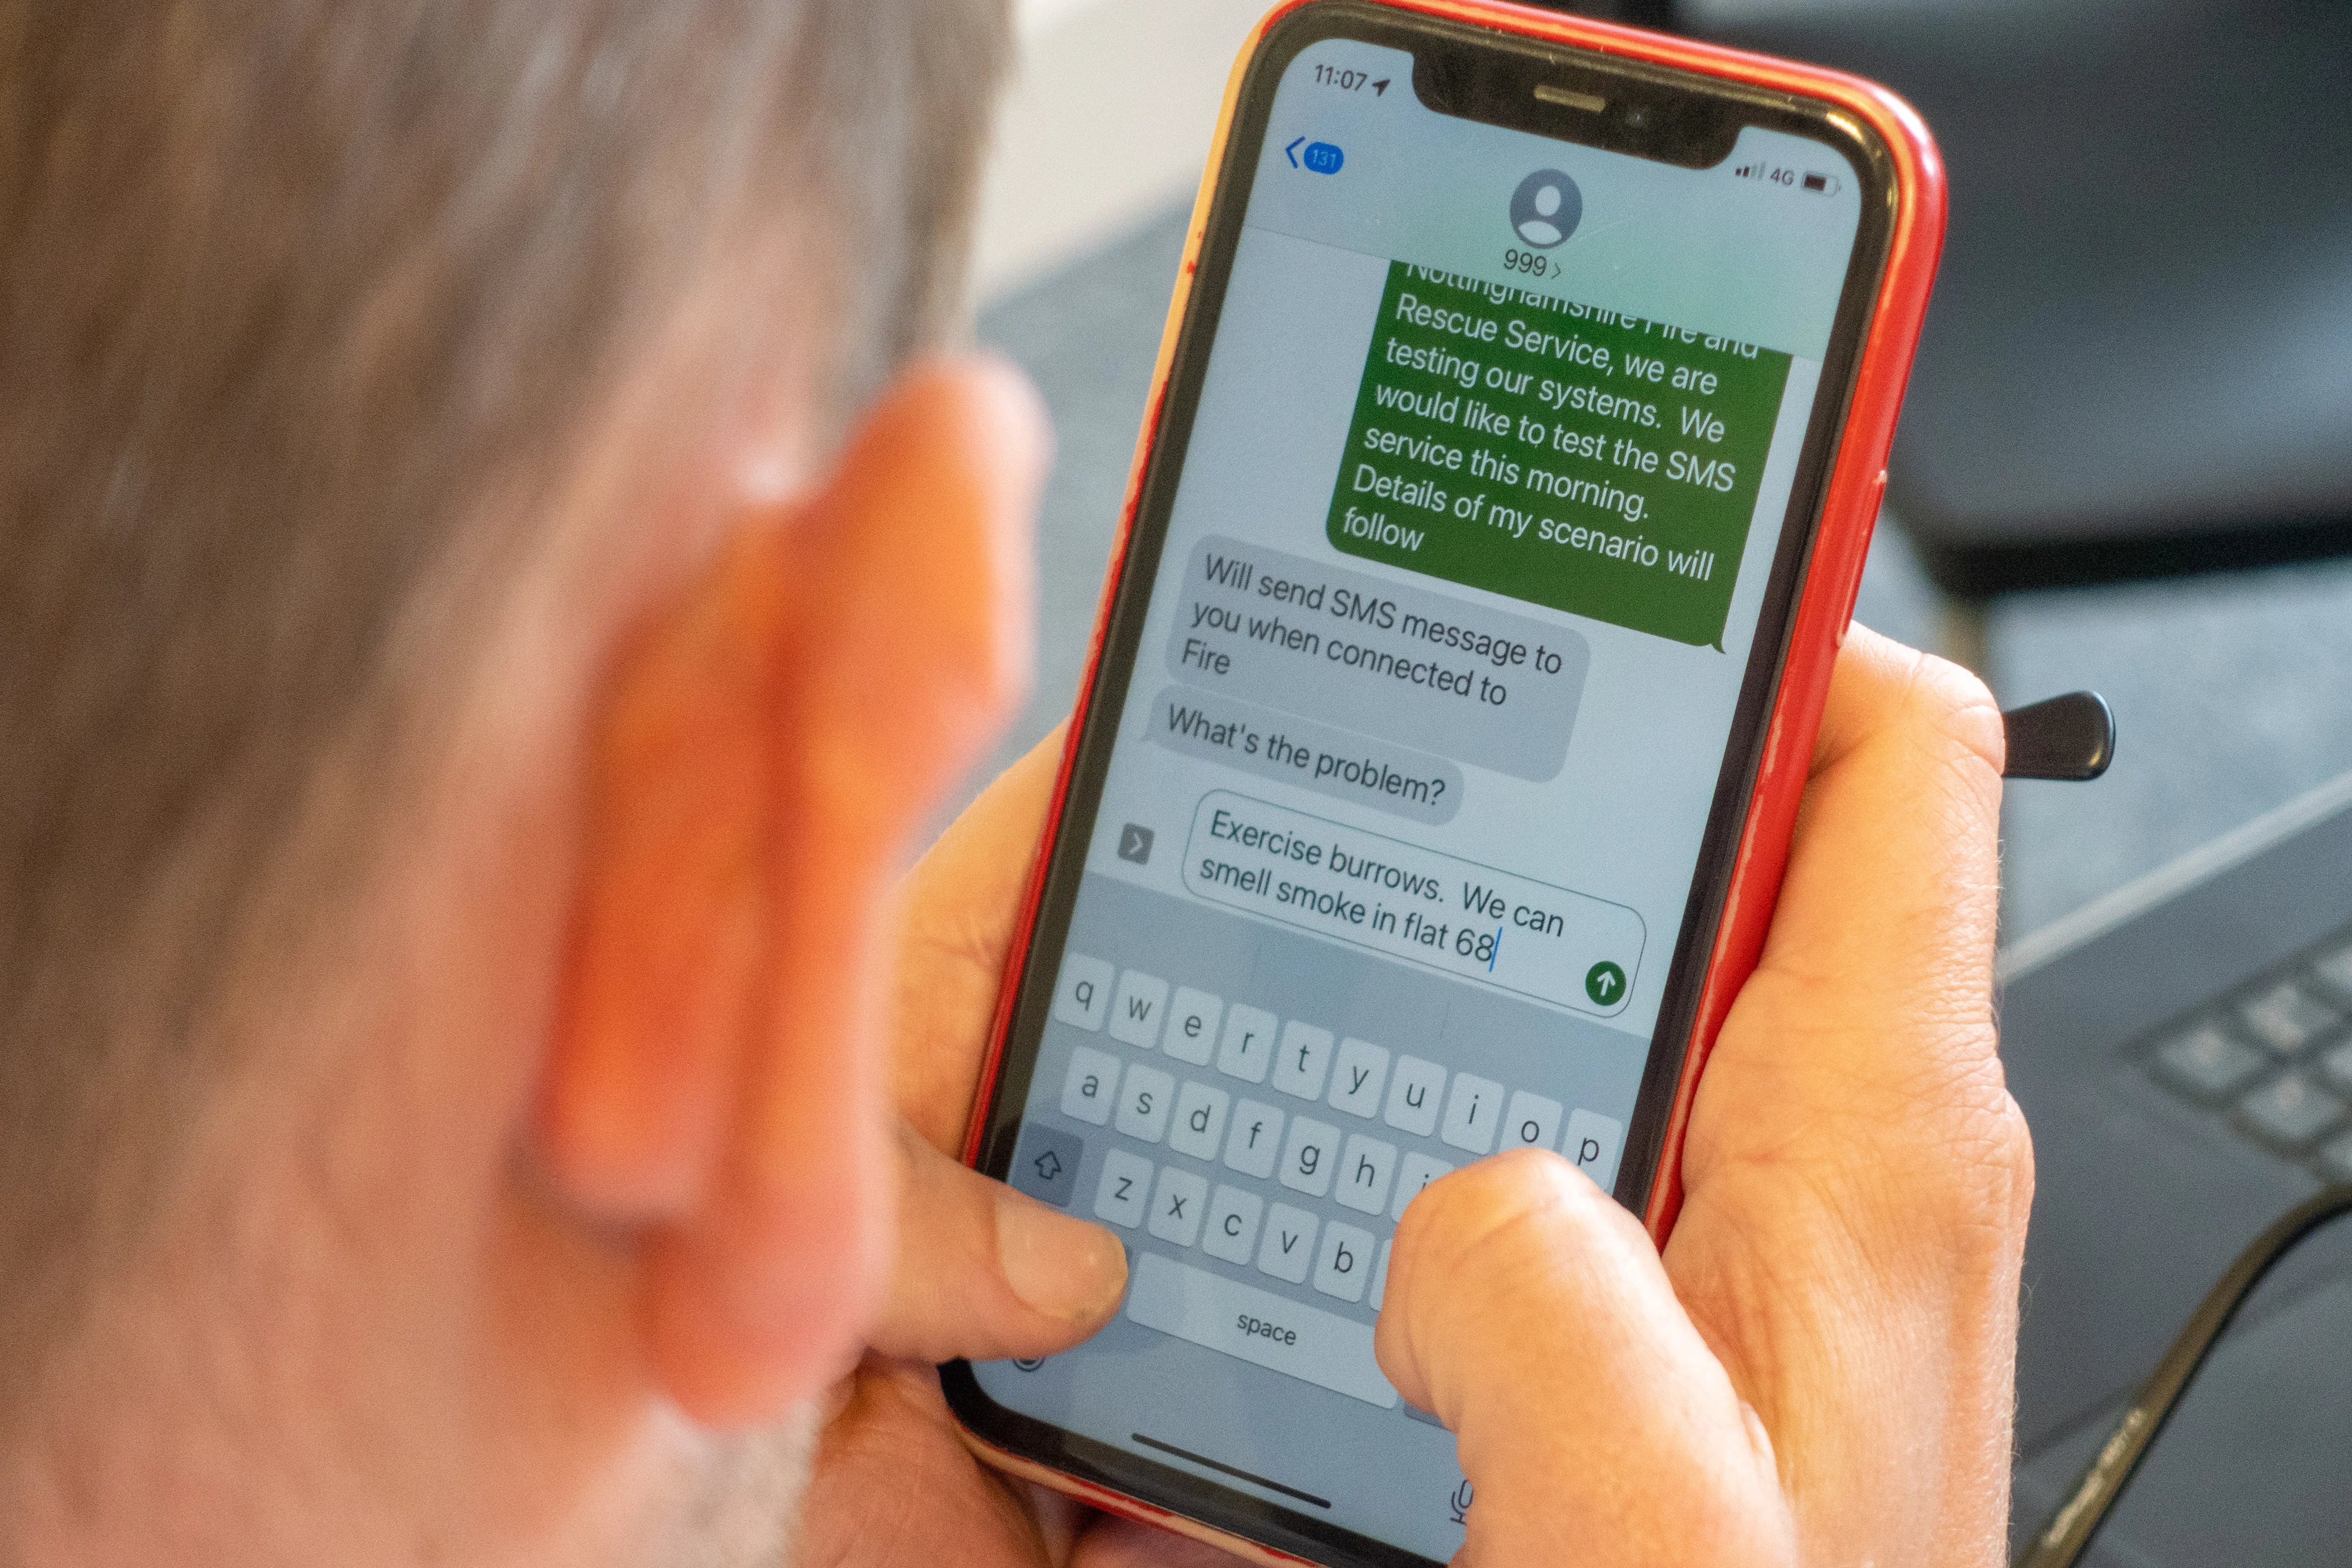 A man types in a message by text to 999 to alert them to a fire in a training scenario